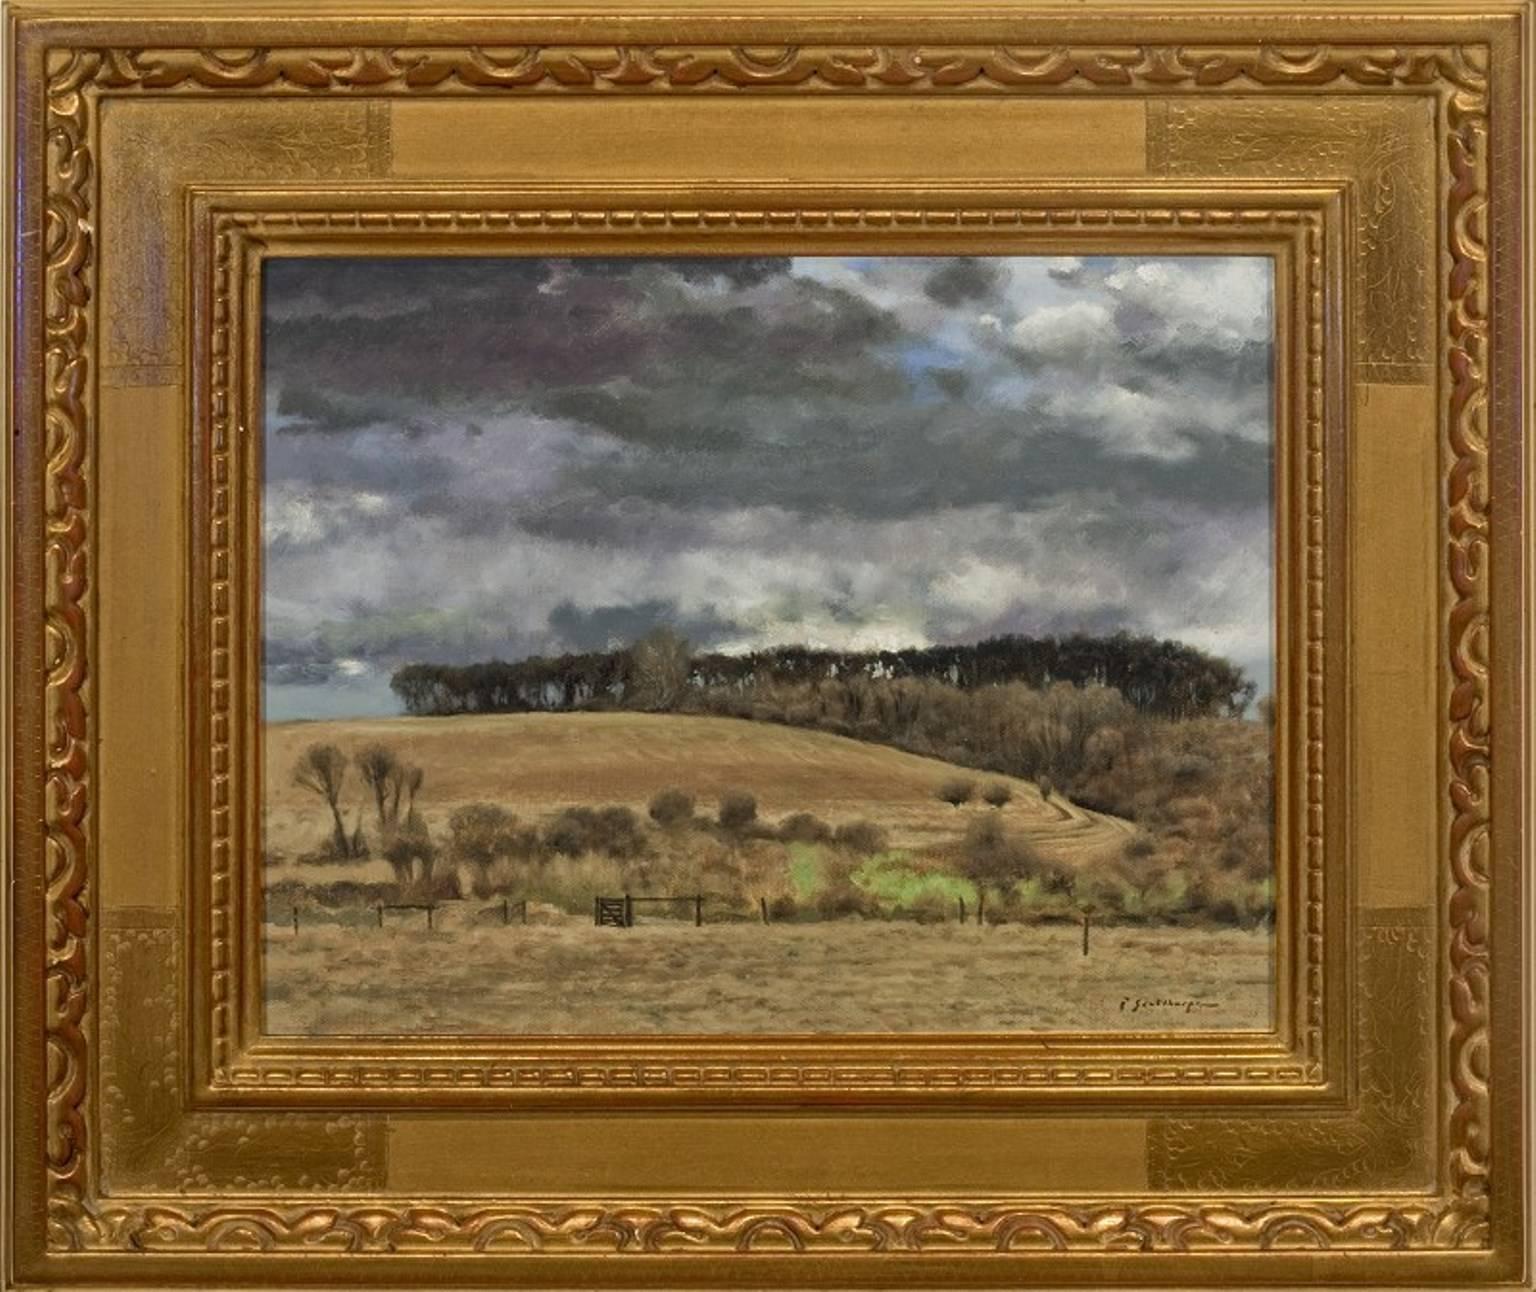 Peter Sculthorpe Landscape Painting - "Skies of Autumn"